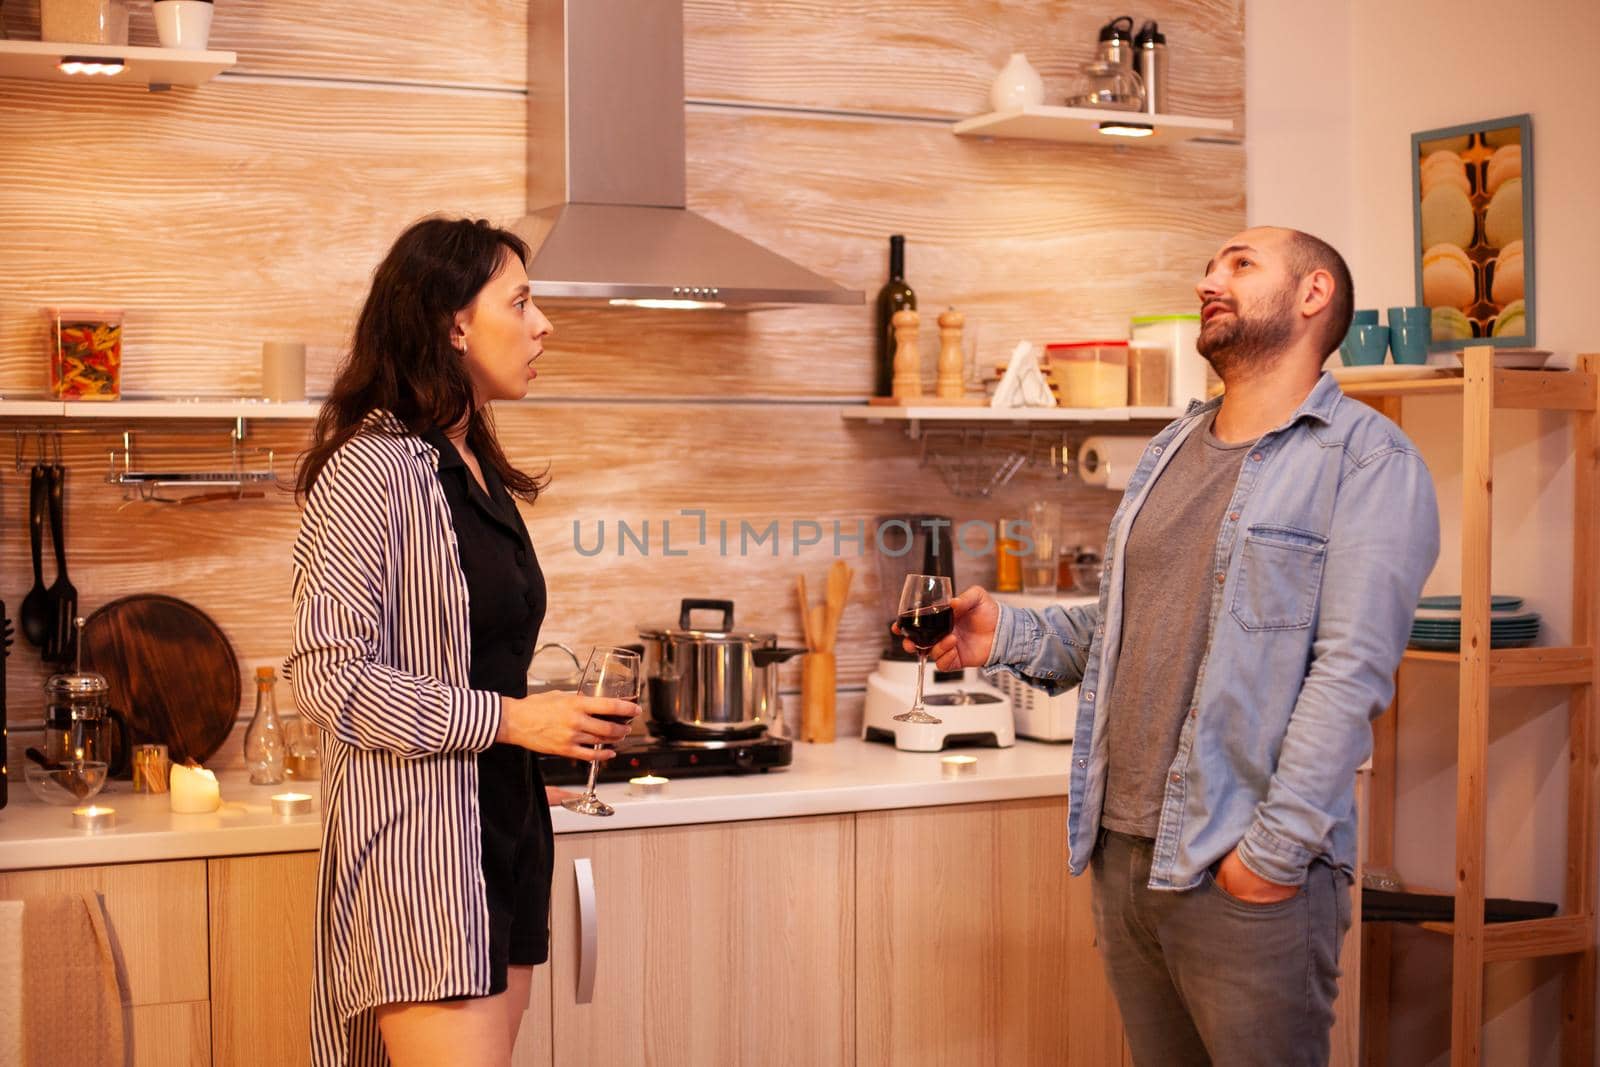 Wife telling a story to her husband while holding a glass of wine in kitchen. Adult couple at home, drinking red wine, talking, smiling, enjoying the meal in dining room.